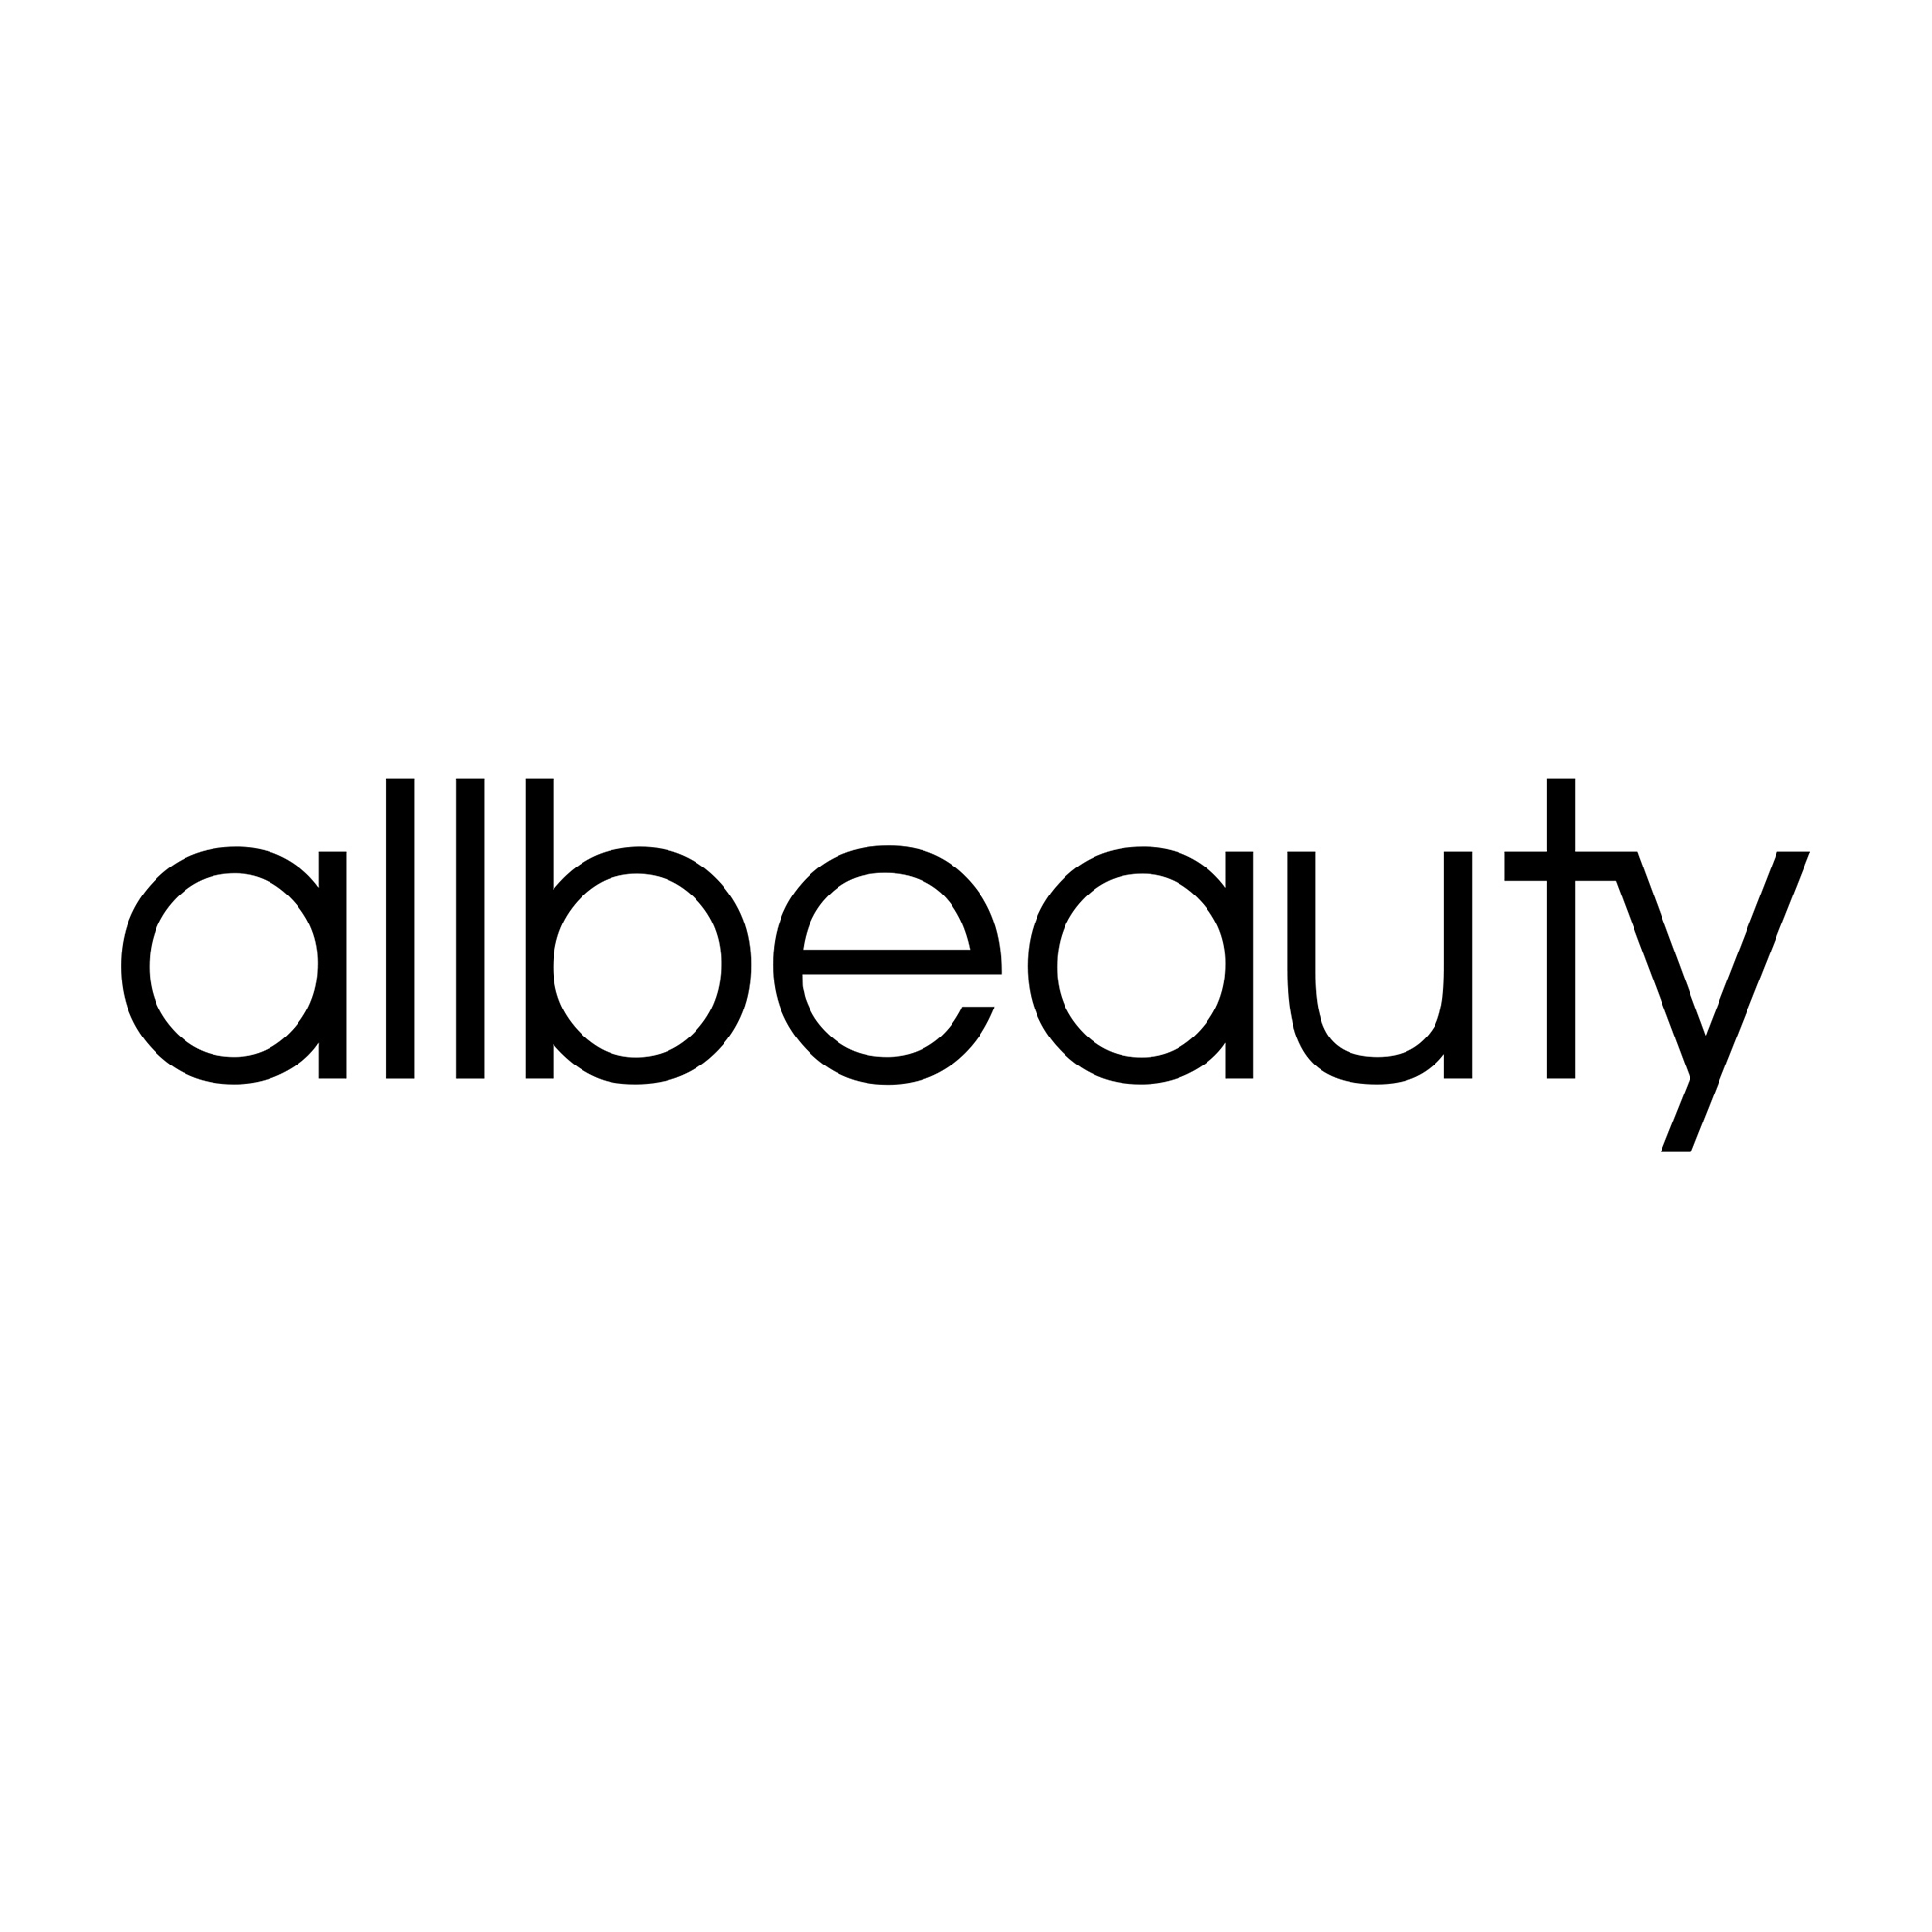 all beauty promotional code, all beauty code, all beauty voucher code